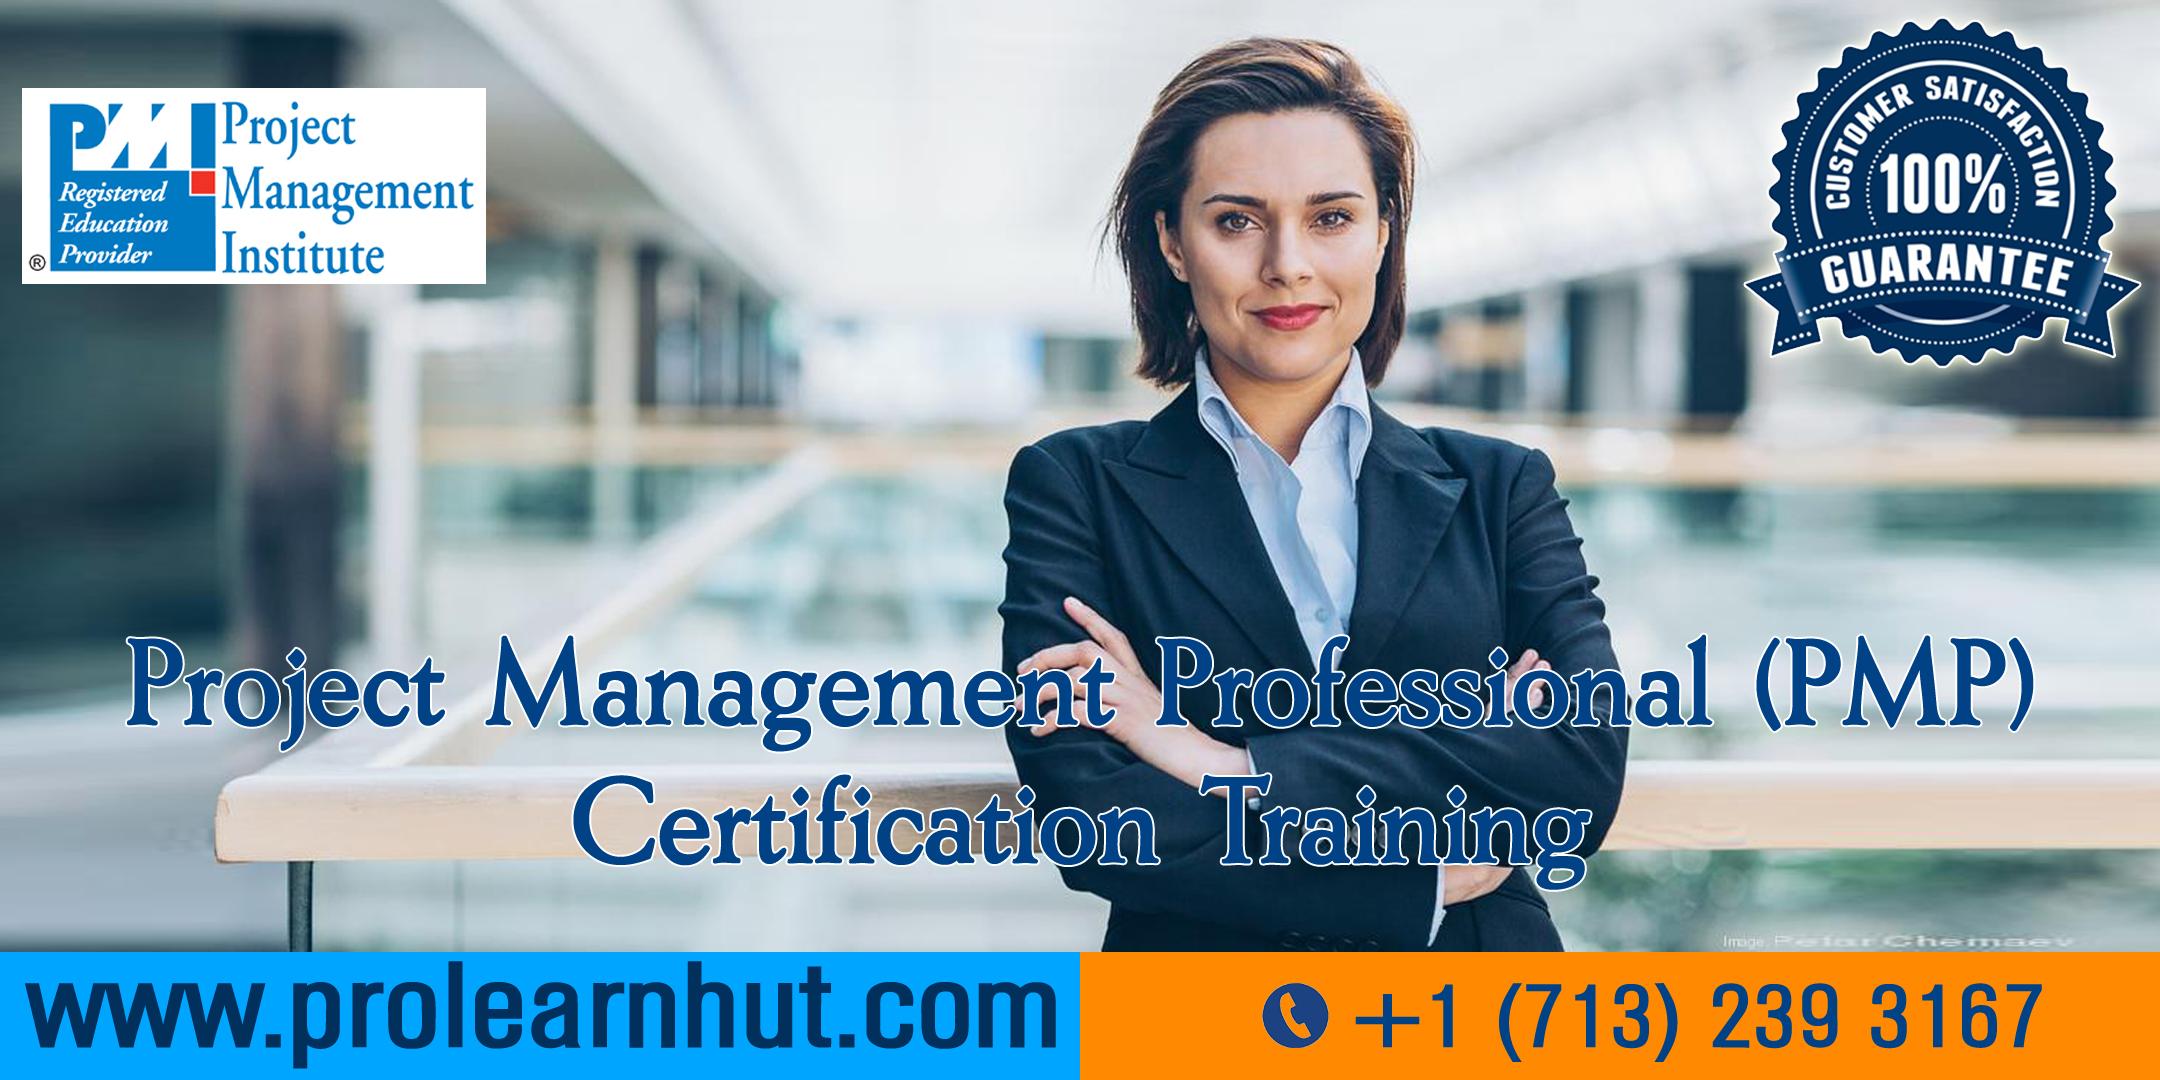 PMP Certification | Project Management Certification| PMP Training in Inglewood, CA | ProLearnHut